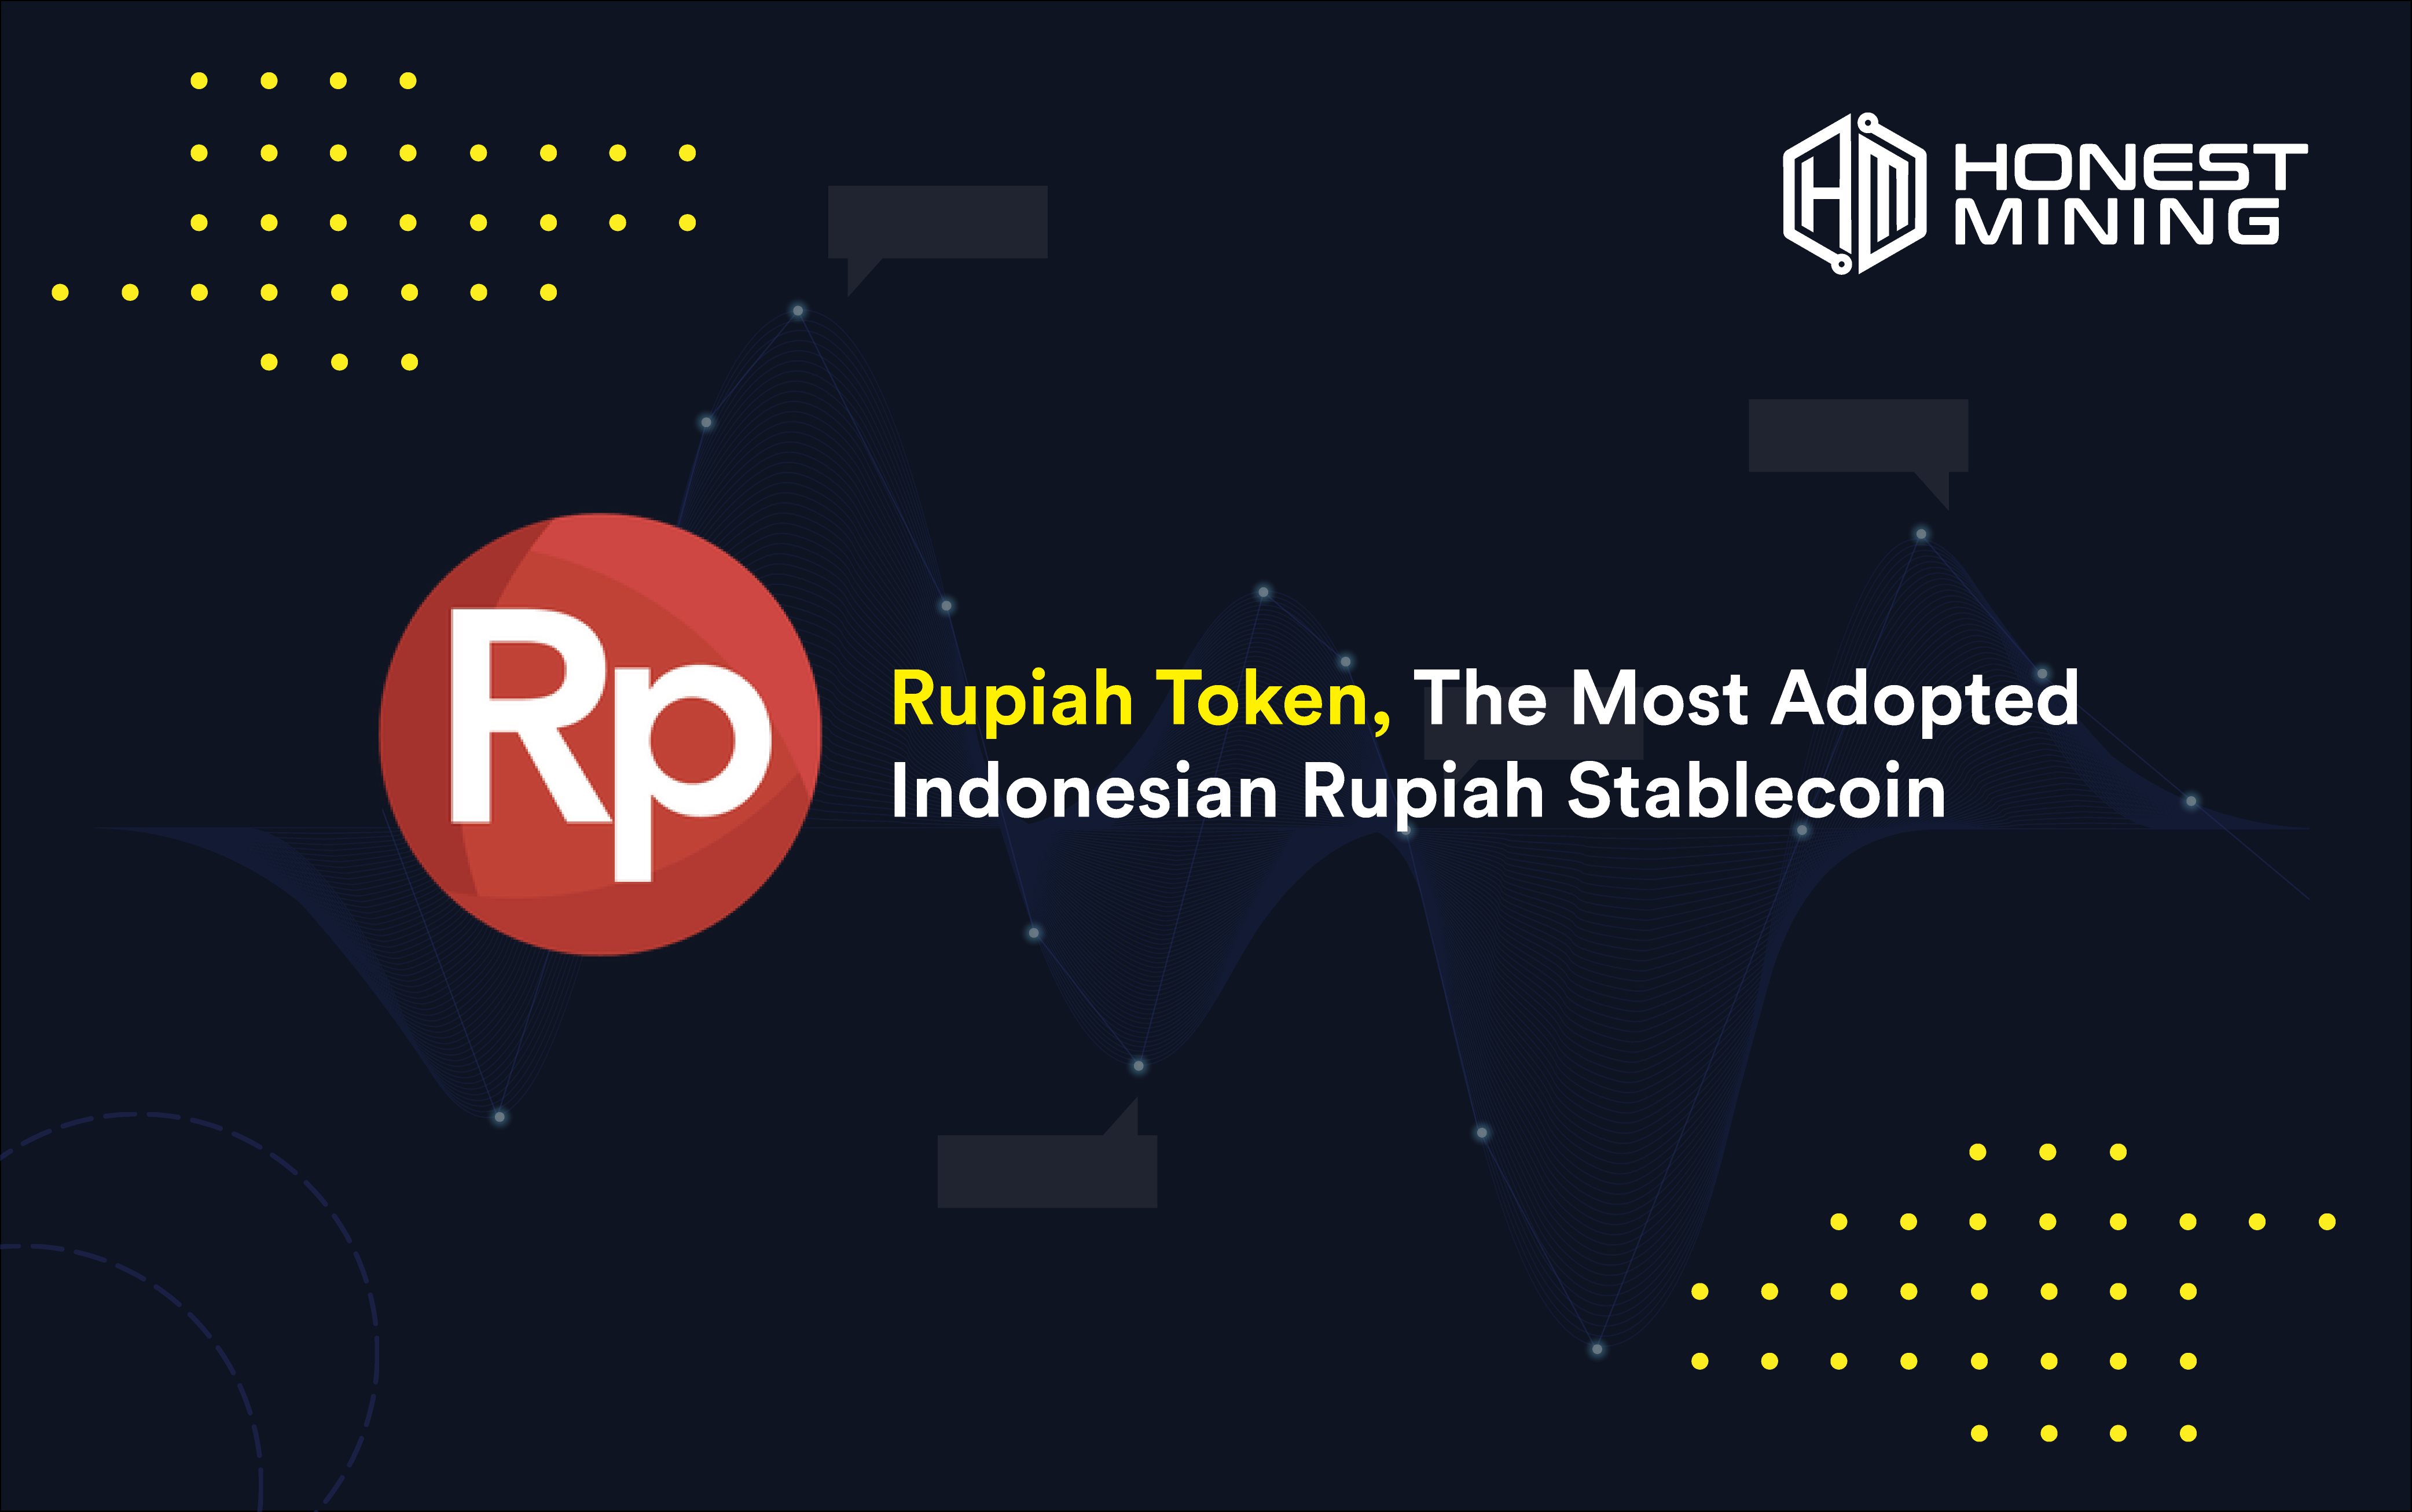 Rupiah Token, The Most Adapted Indonesian Rupiah Stablecoin